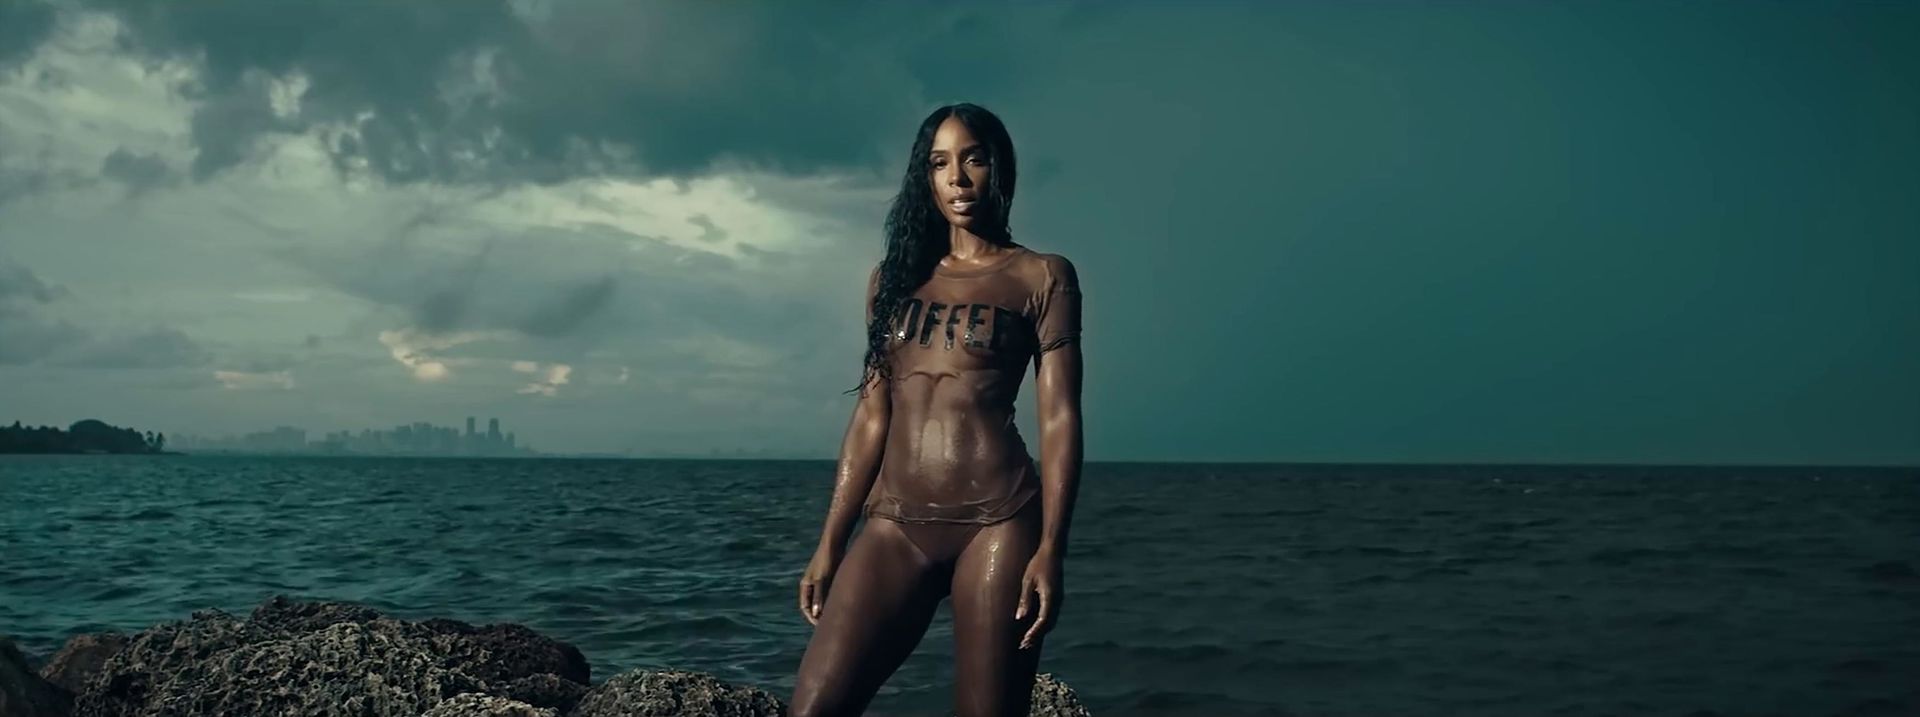 Watch Kelly Rowland’s new music video "COFFEE" (2020), where you ...